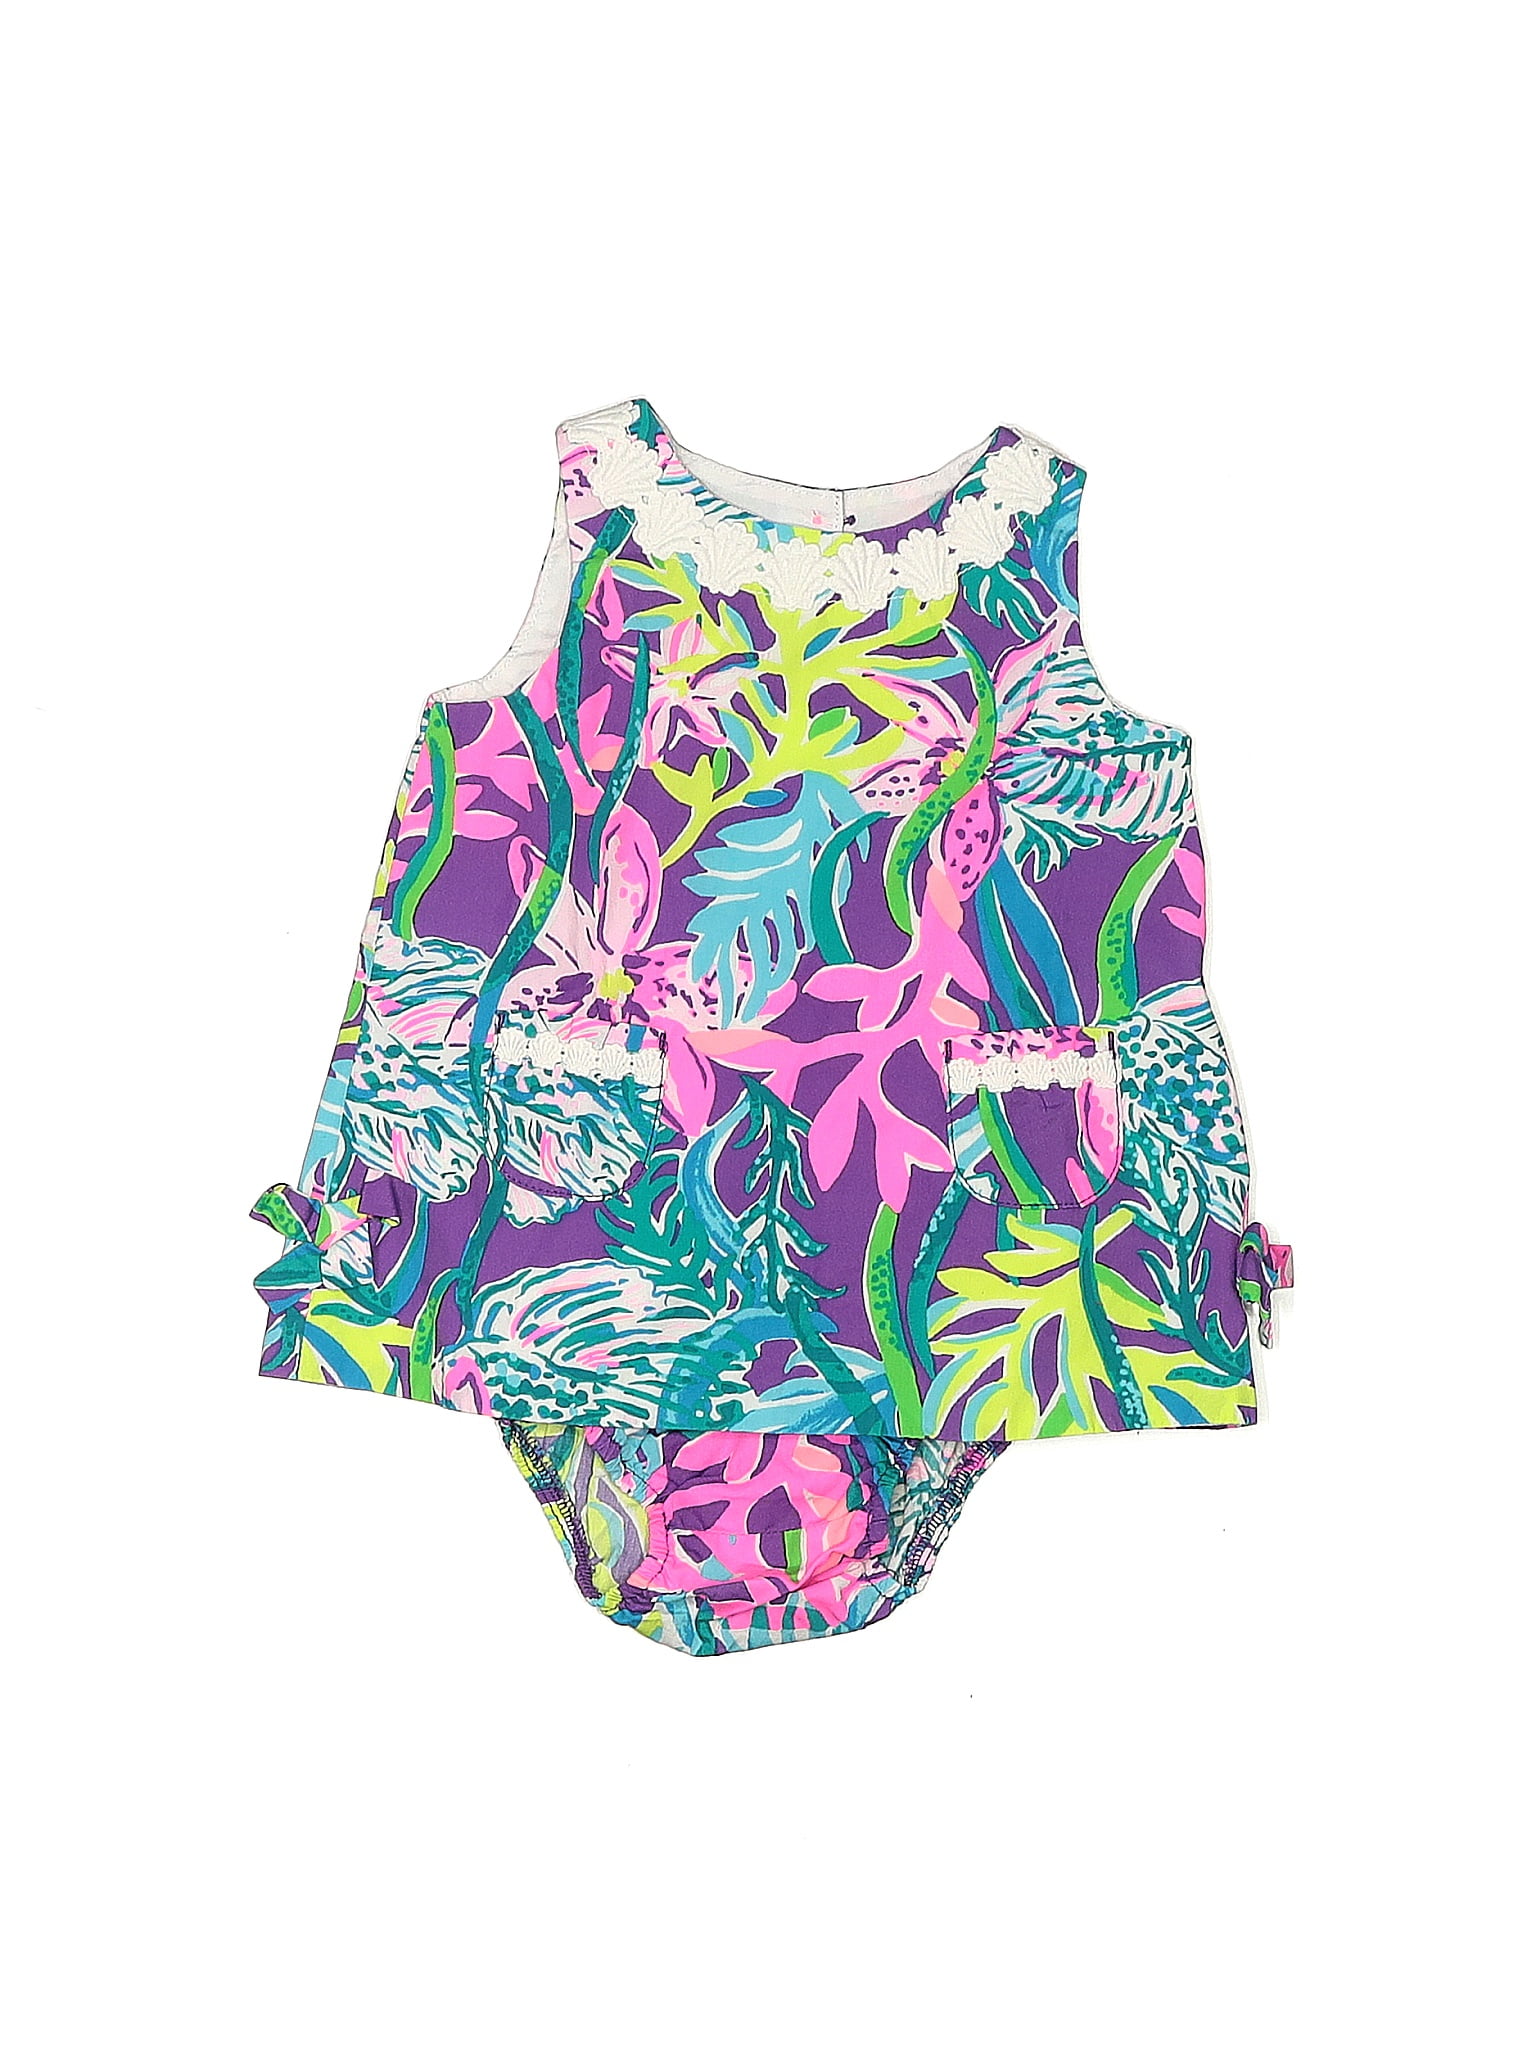 Lilly Pulitzer 100% Cotton Floral Purple Dress Size 6-12 mo - 65% off ...